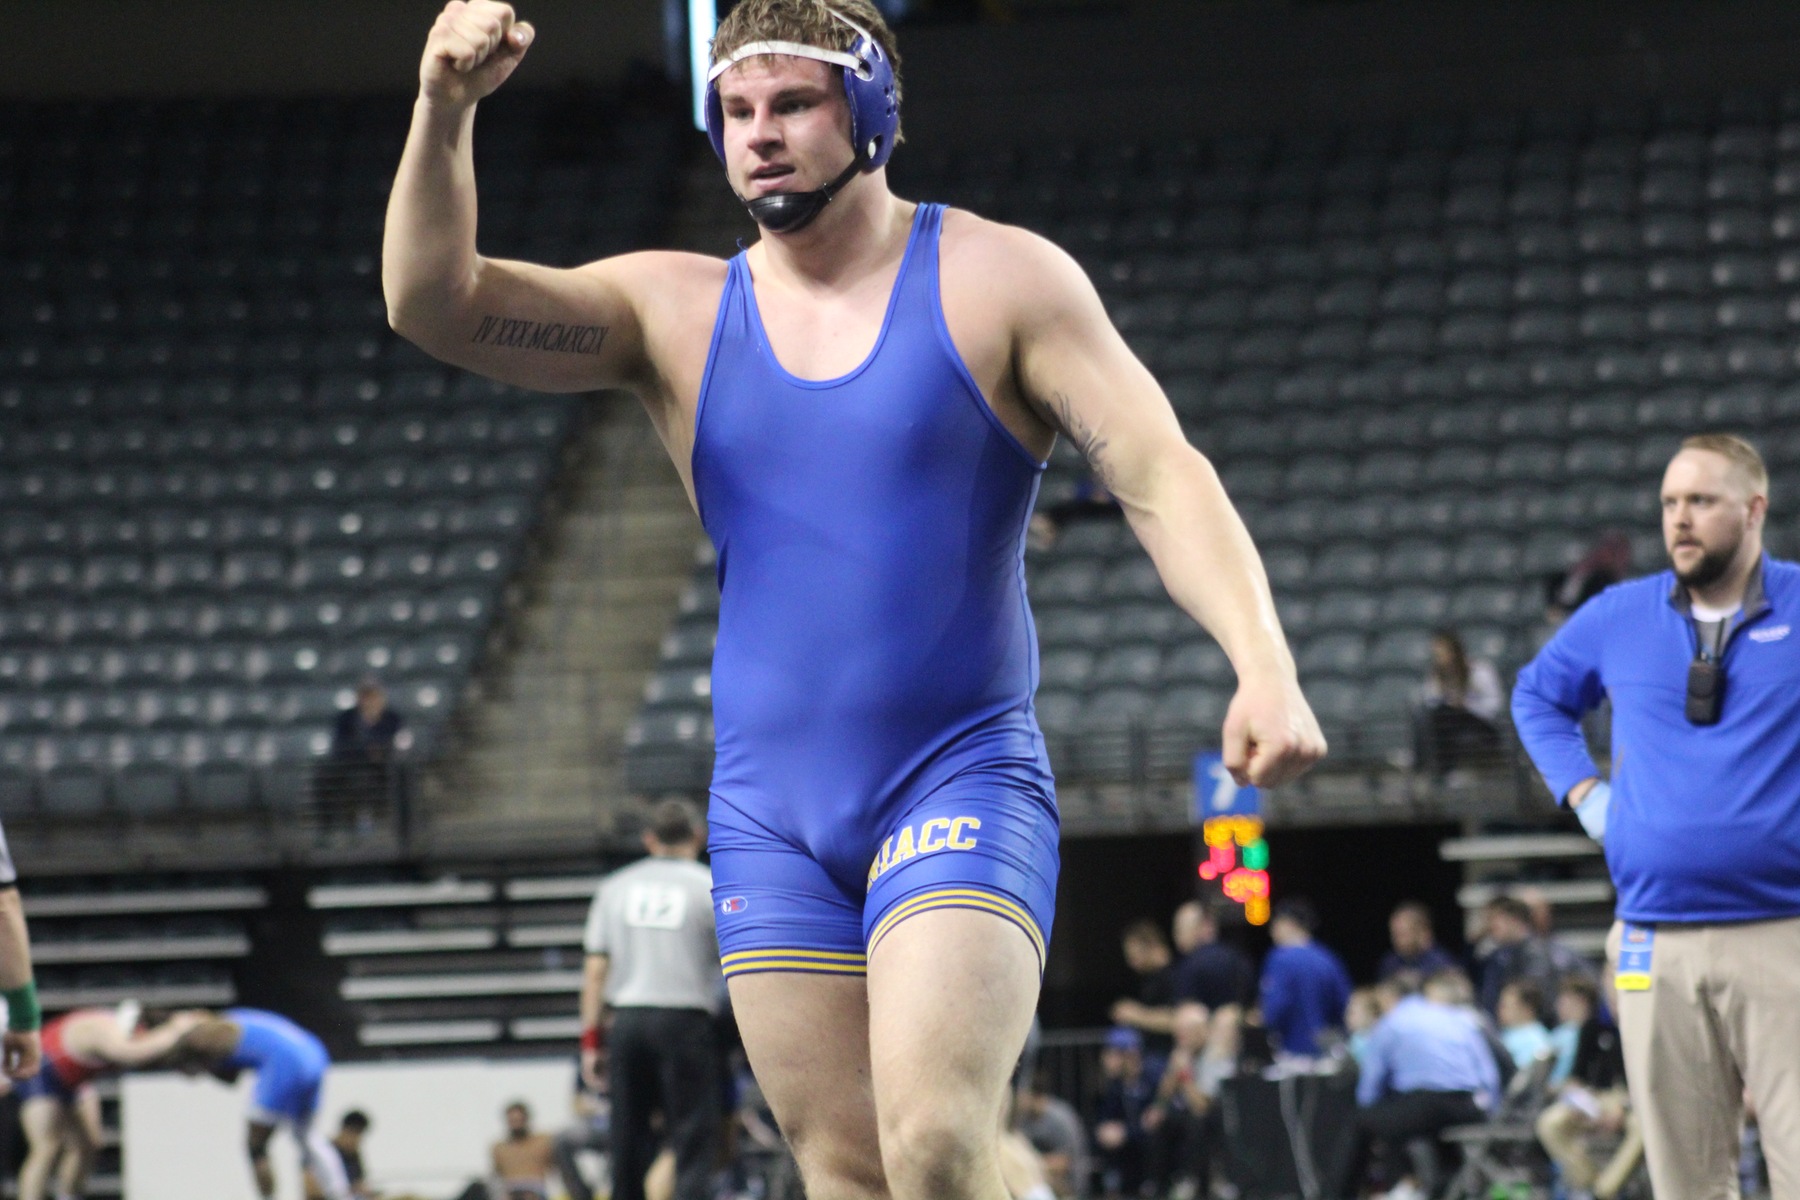 NIACC's Zach Santee celebrates his second-round pin at 285 pounds at the national wrestling tournament in Council Bluffs.